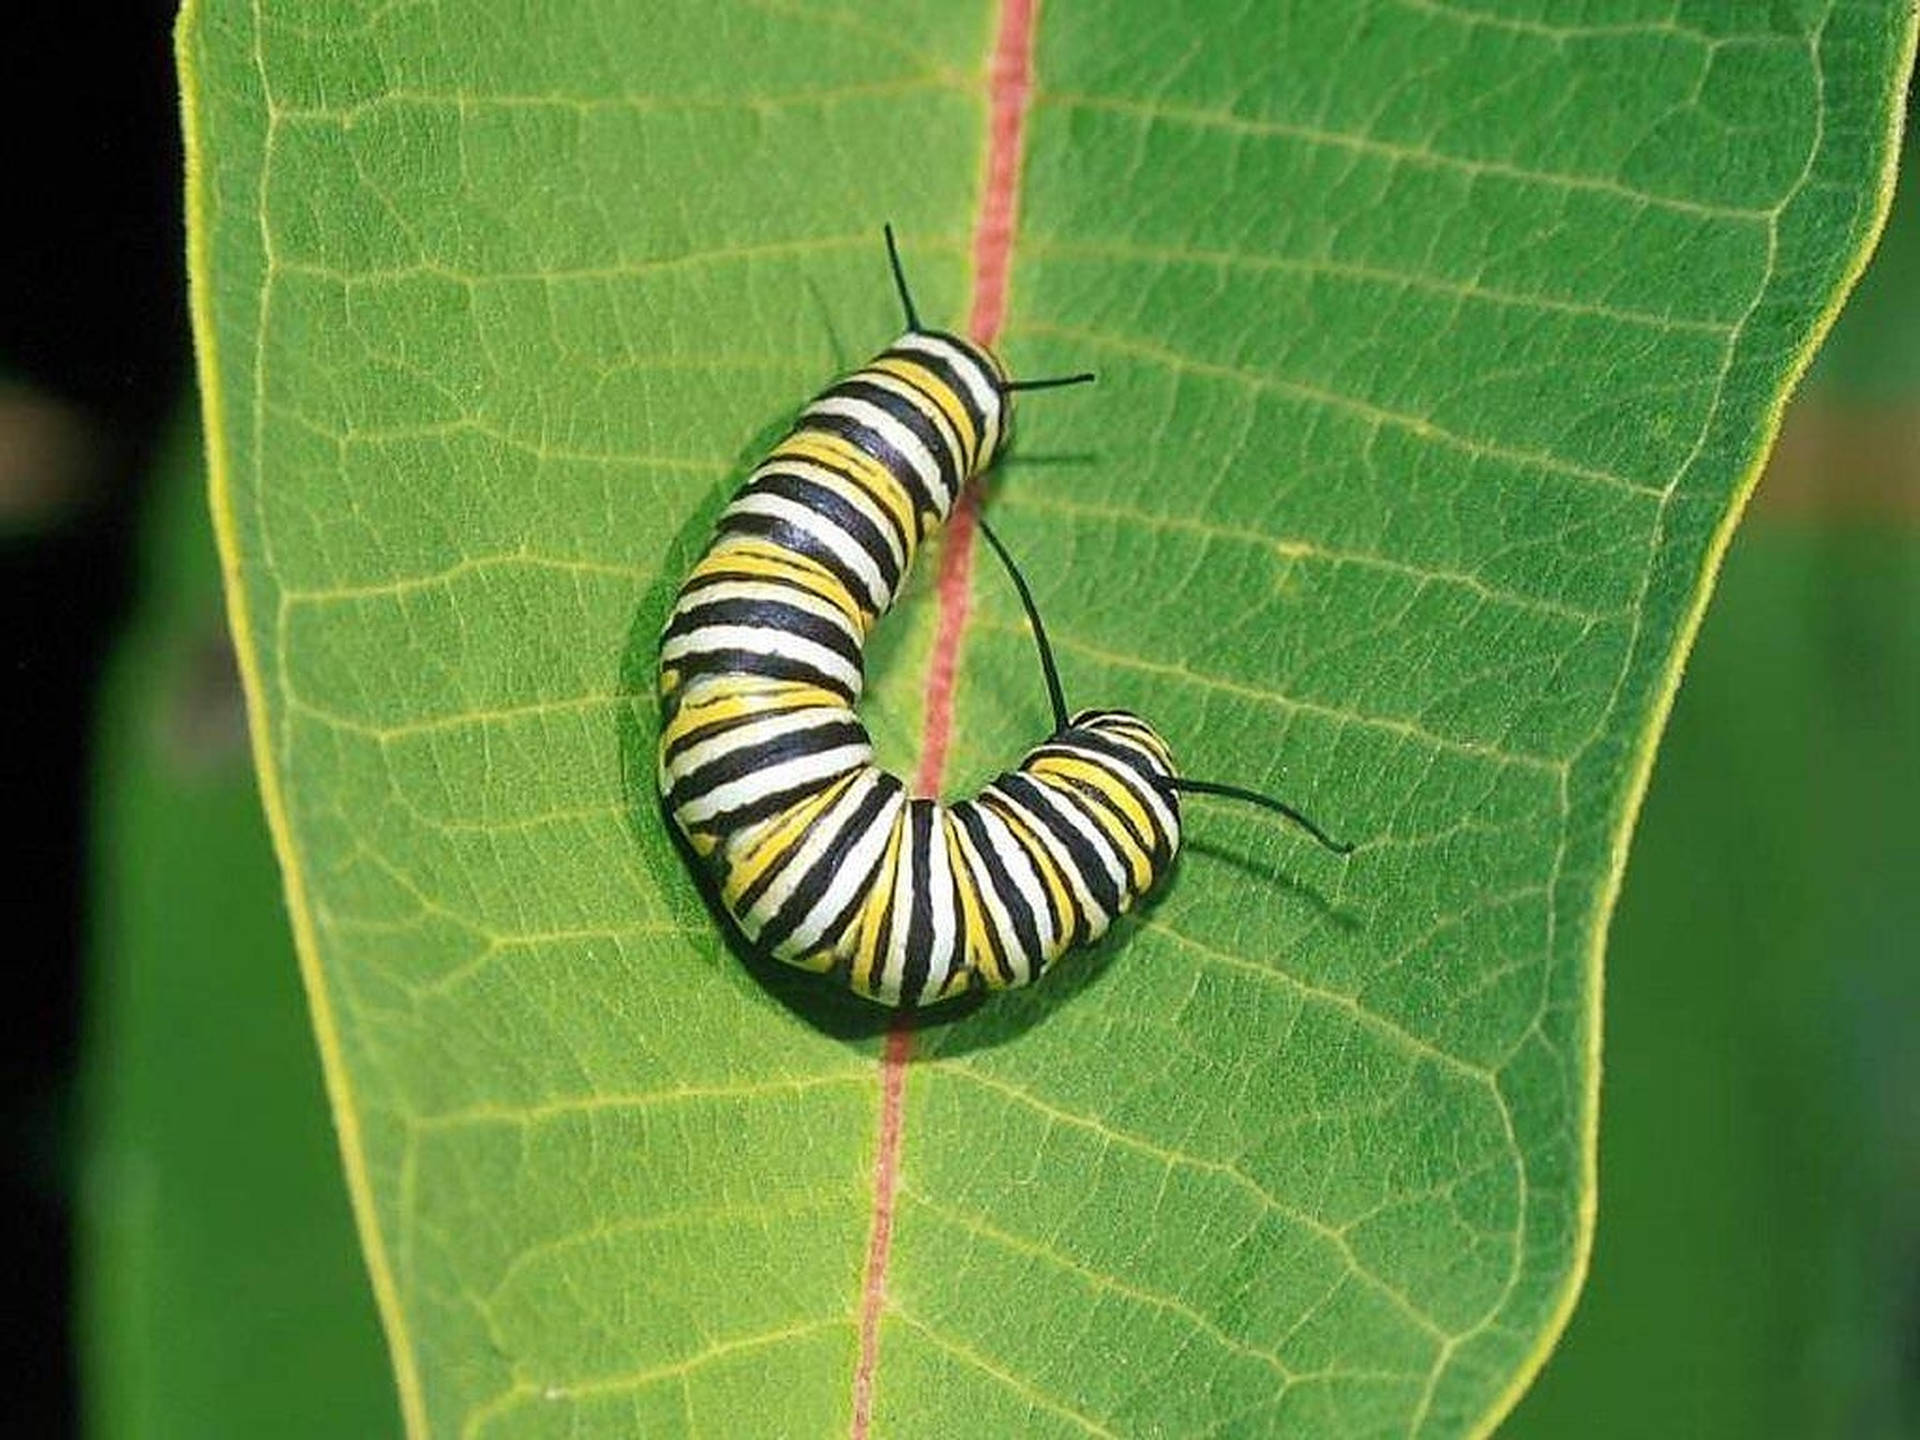 Caterpillar Insect On Leaf Wallpaper